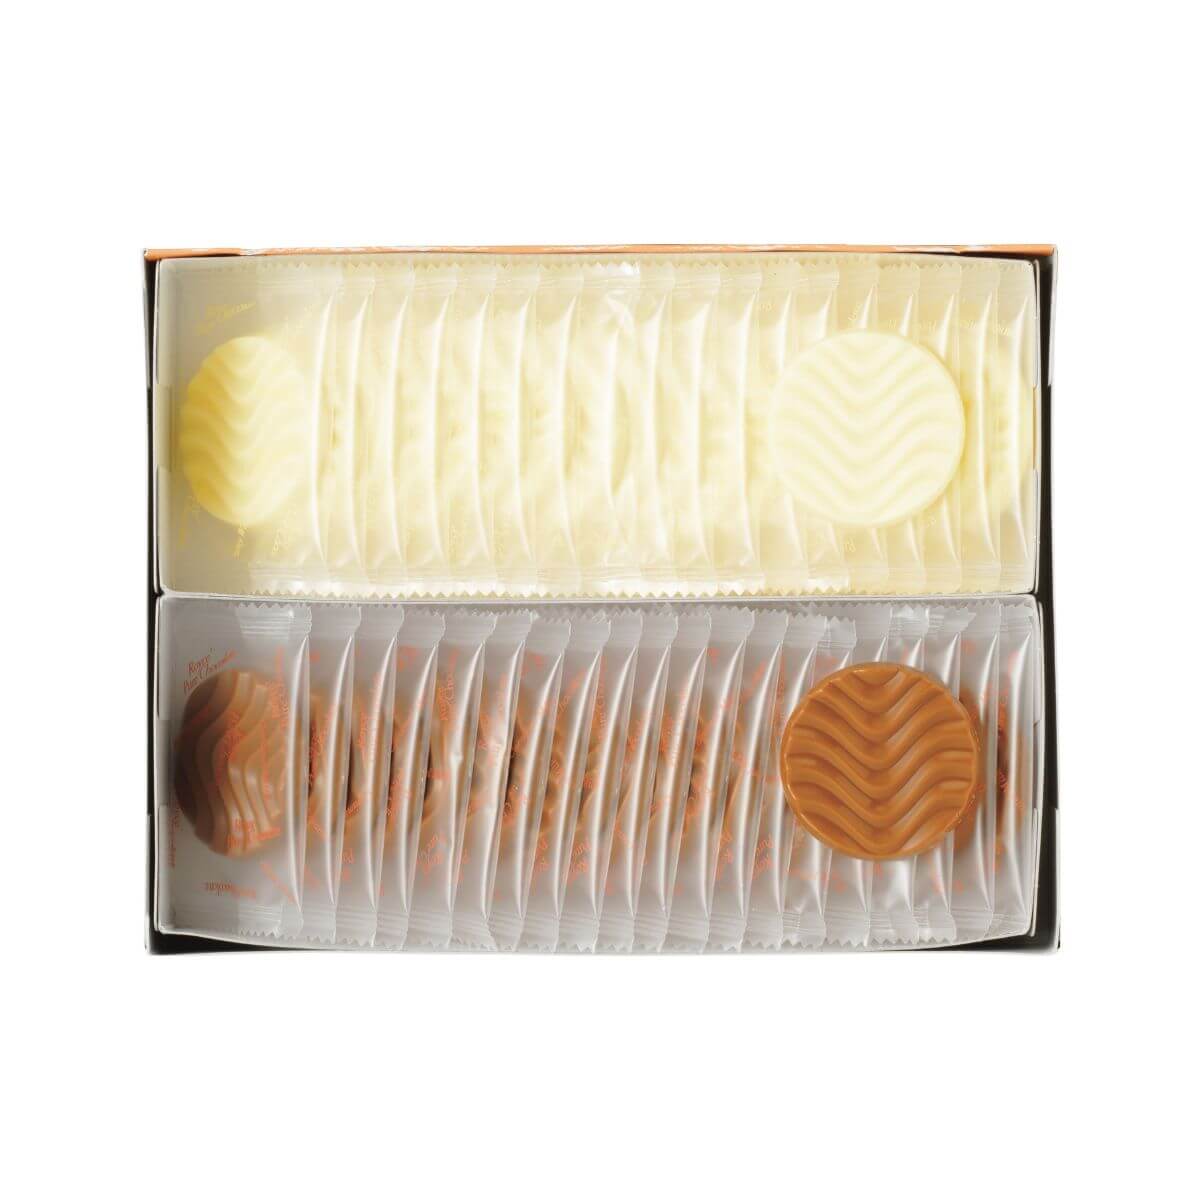 ROYCE' Chocolate - Pure Chocolate "Caramel Milk & Creamy White" - Image shows a box filled with individually wrapped white chocolates on top and brown chocolates on bottom.